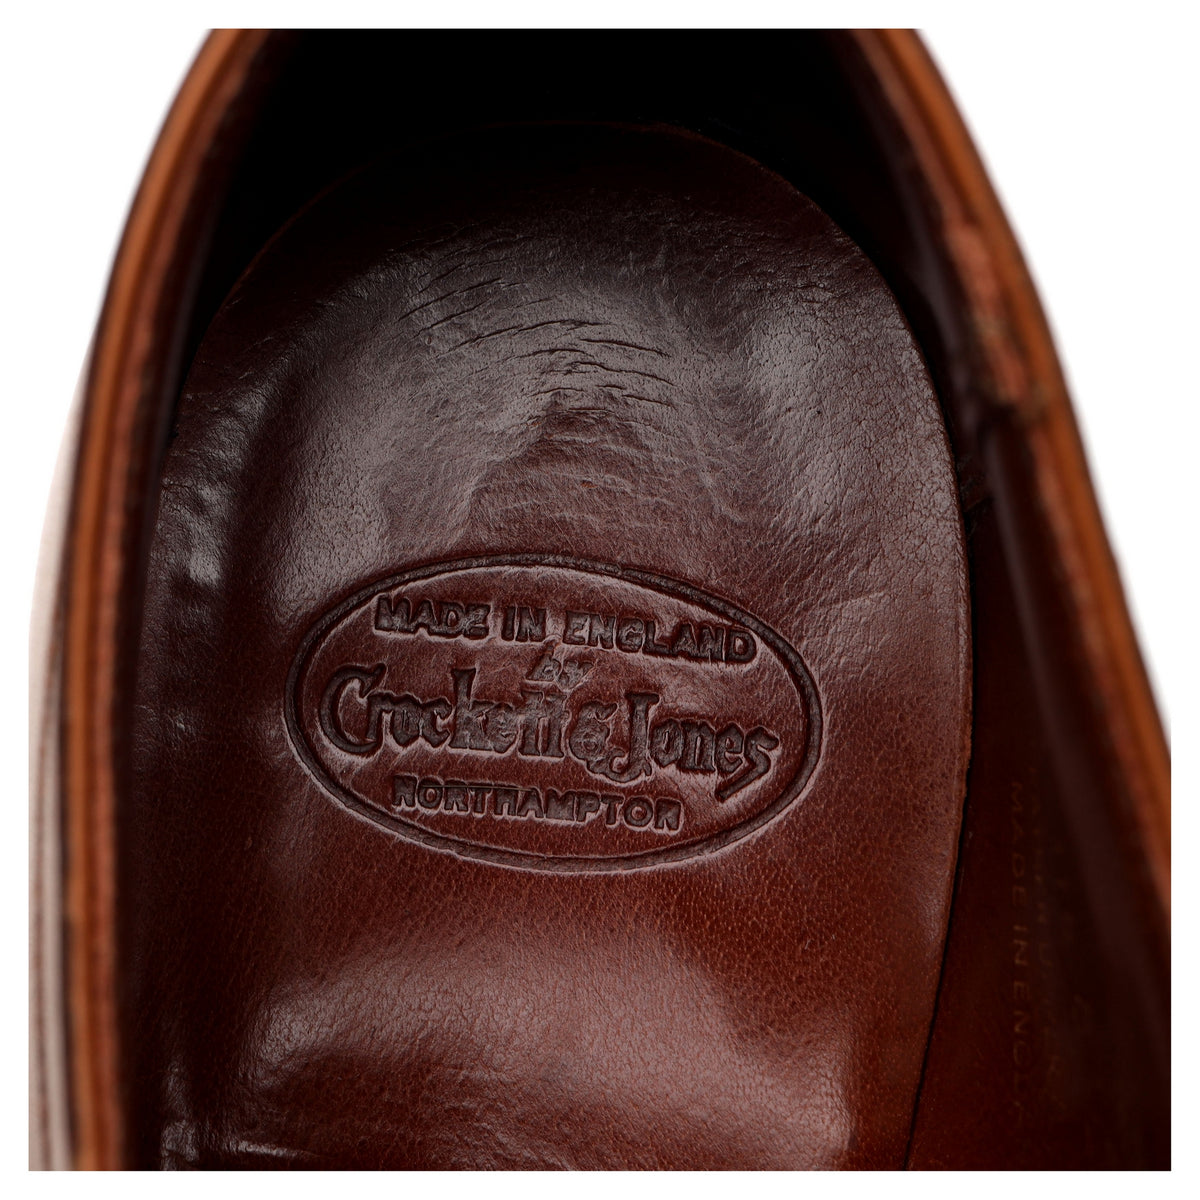 &#39;Mansfield&#39; Tan Brown Leather Derby UK 8 E